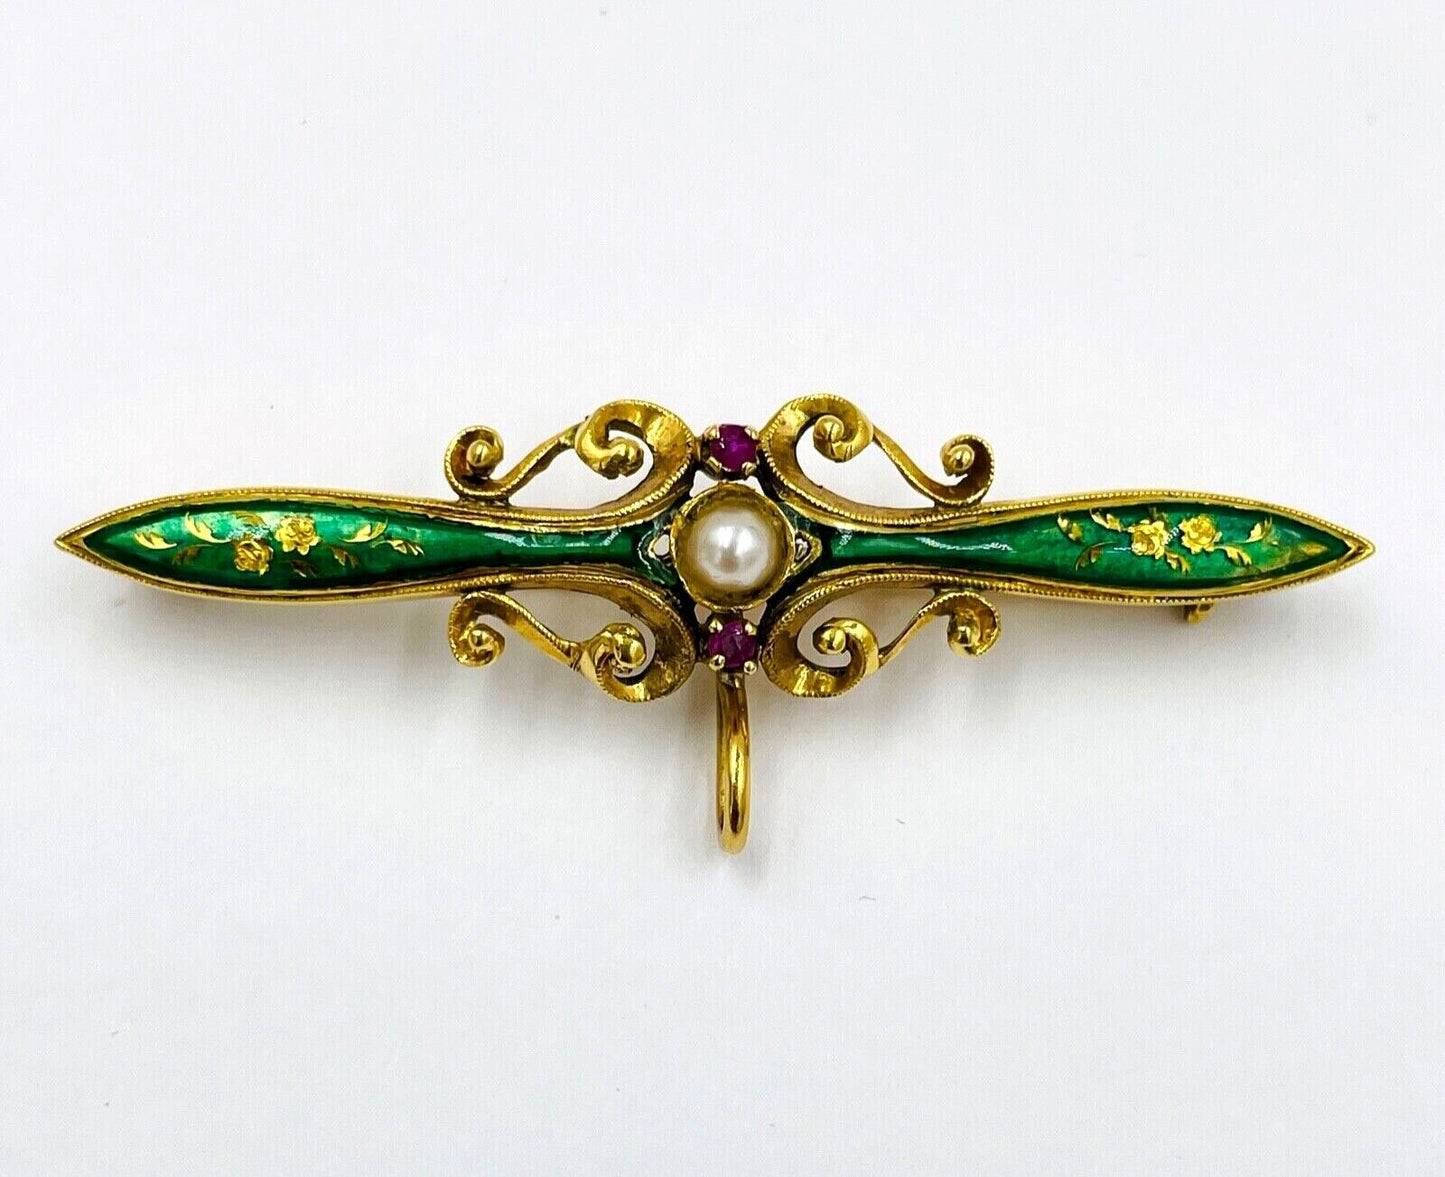 Vintage 18k Gold Enamel Pearl and Ruby Brooch Bar Pin with hook